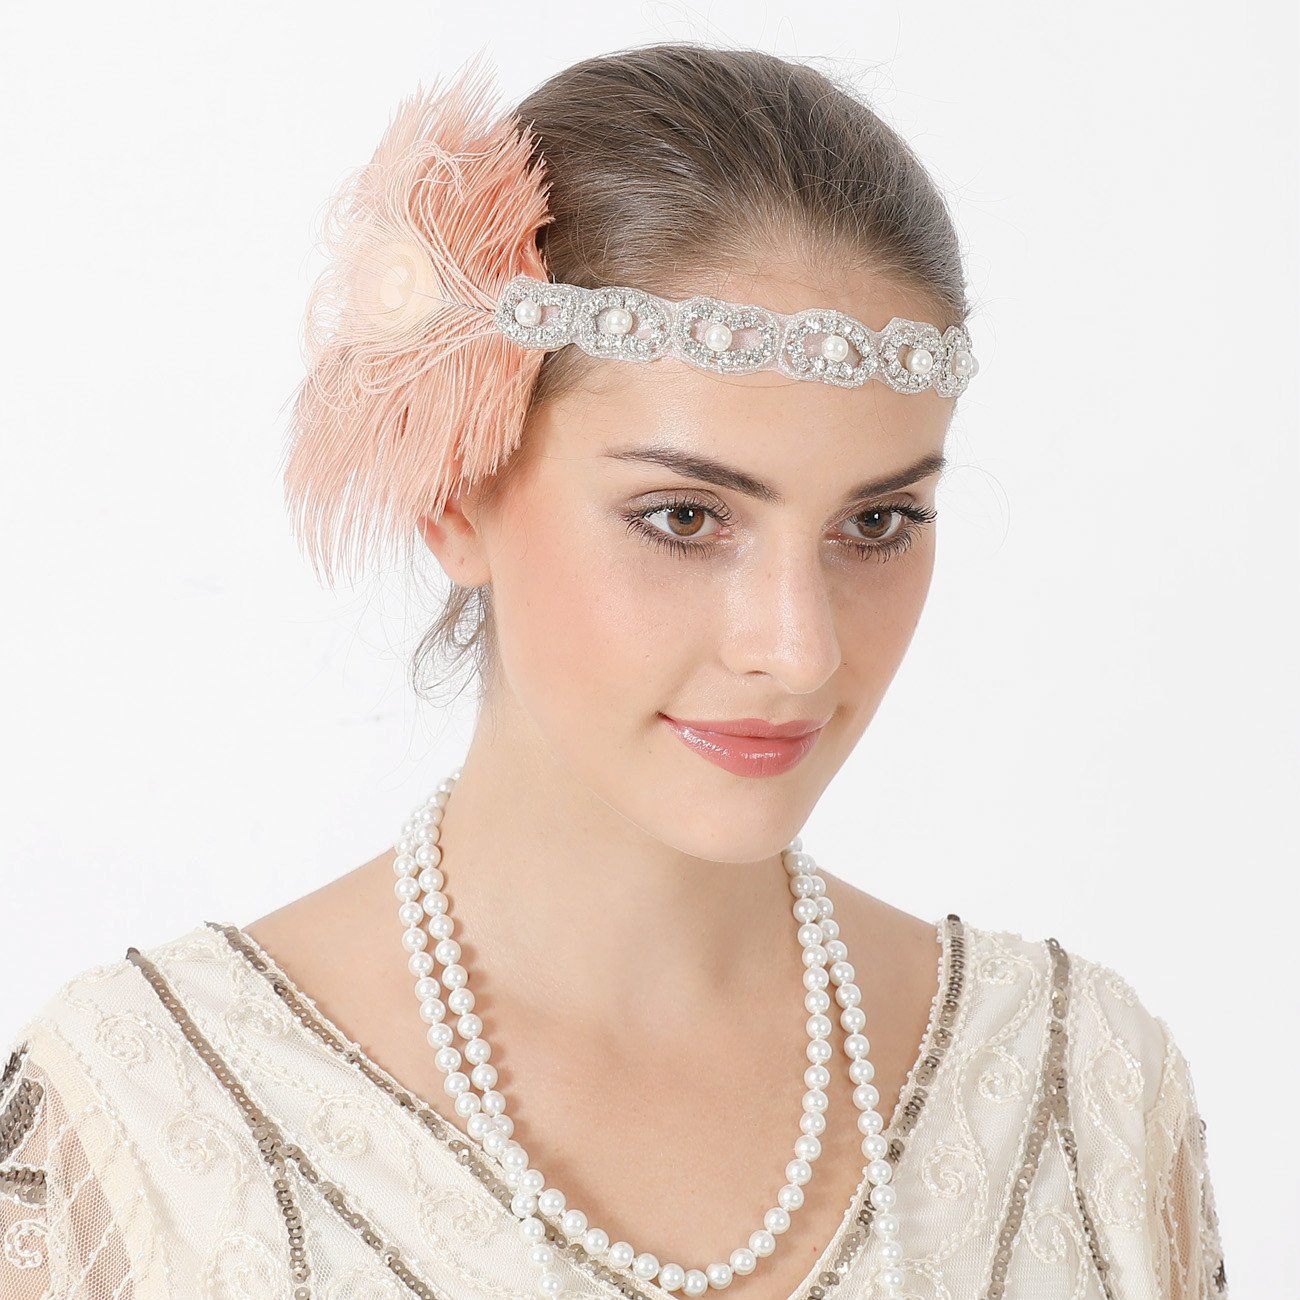 Vintage 1920s Gatsby Headpiece Women Flapper Headband for Roaring 20s Costume Party